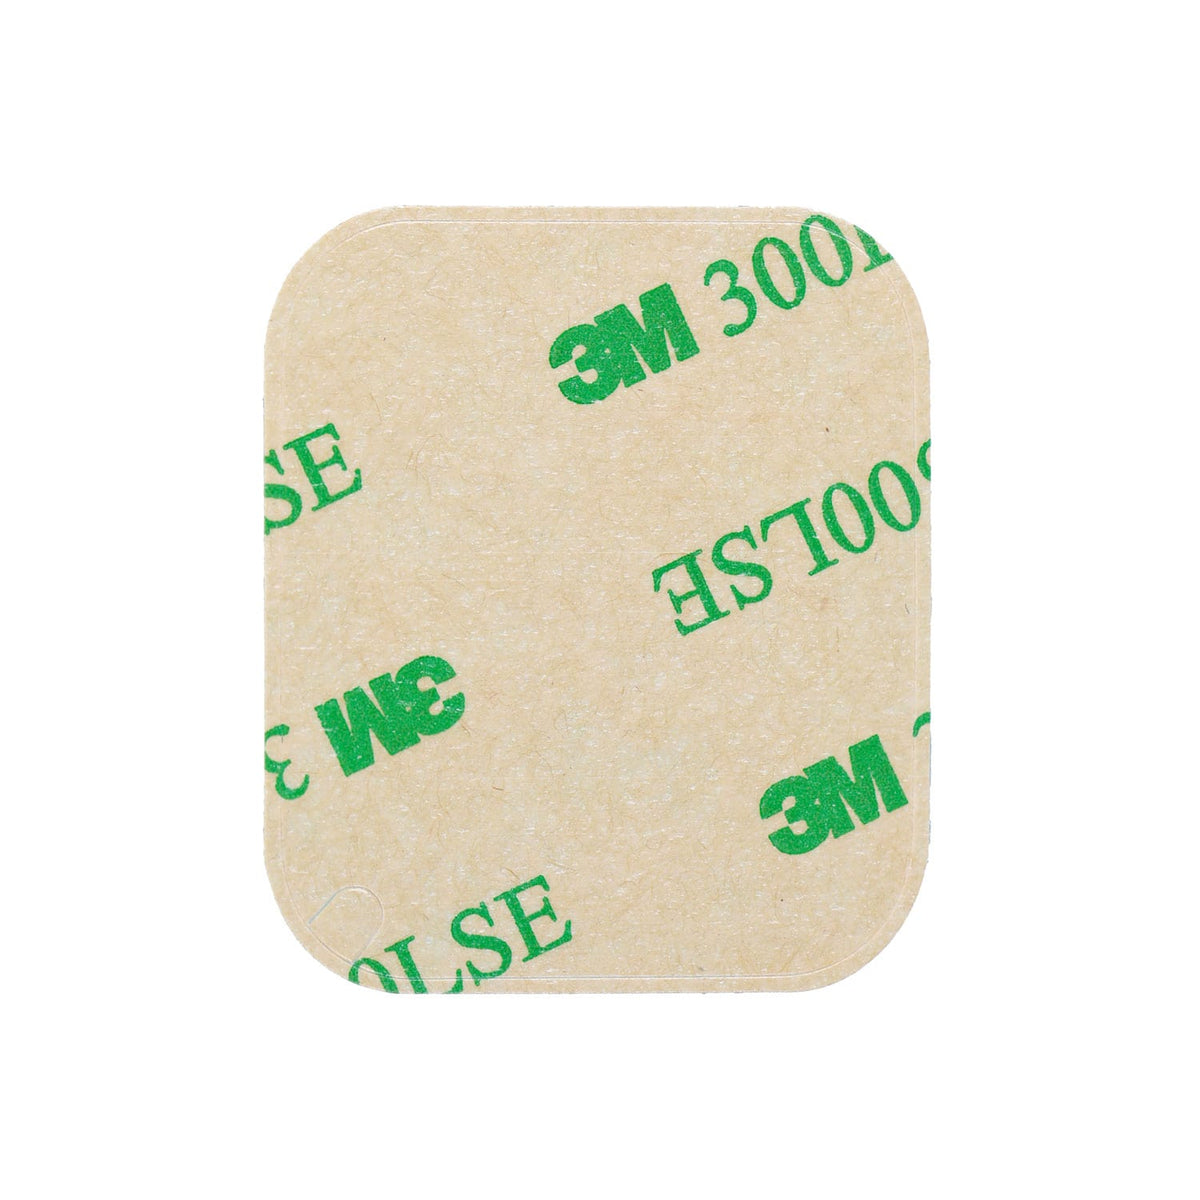 LCD STICKER ADHESIVE TAPE FOR APPLE WATCH S4 40MM